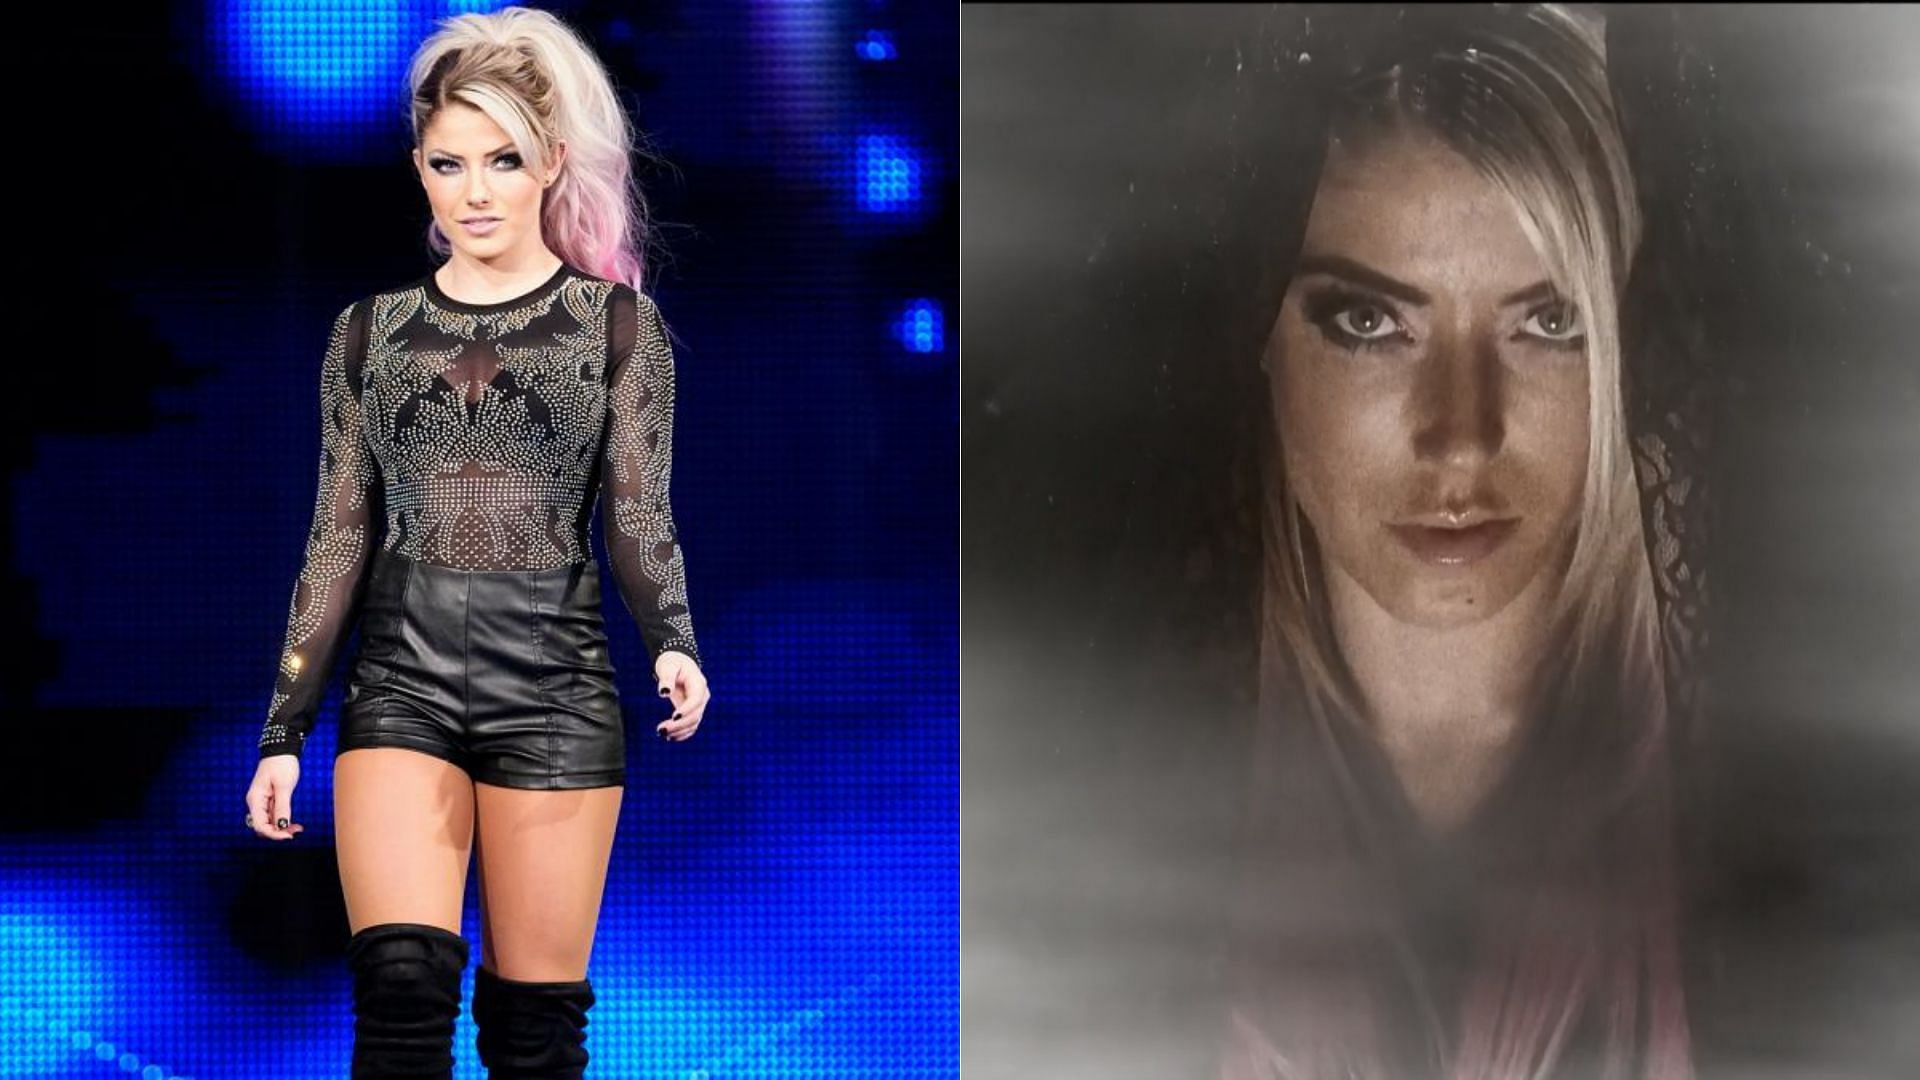 Alexa Bliss&rsquo; on-screen character has undergone several transformations